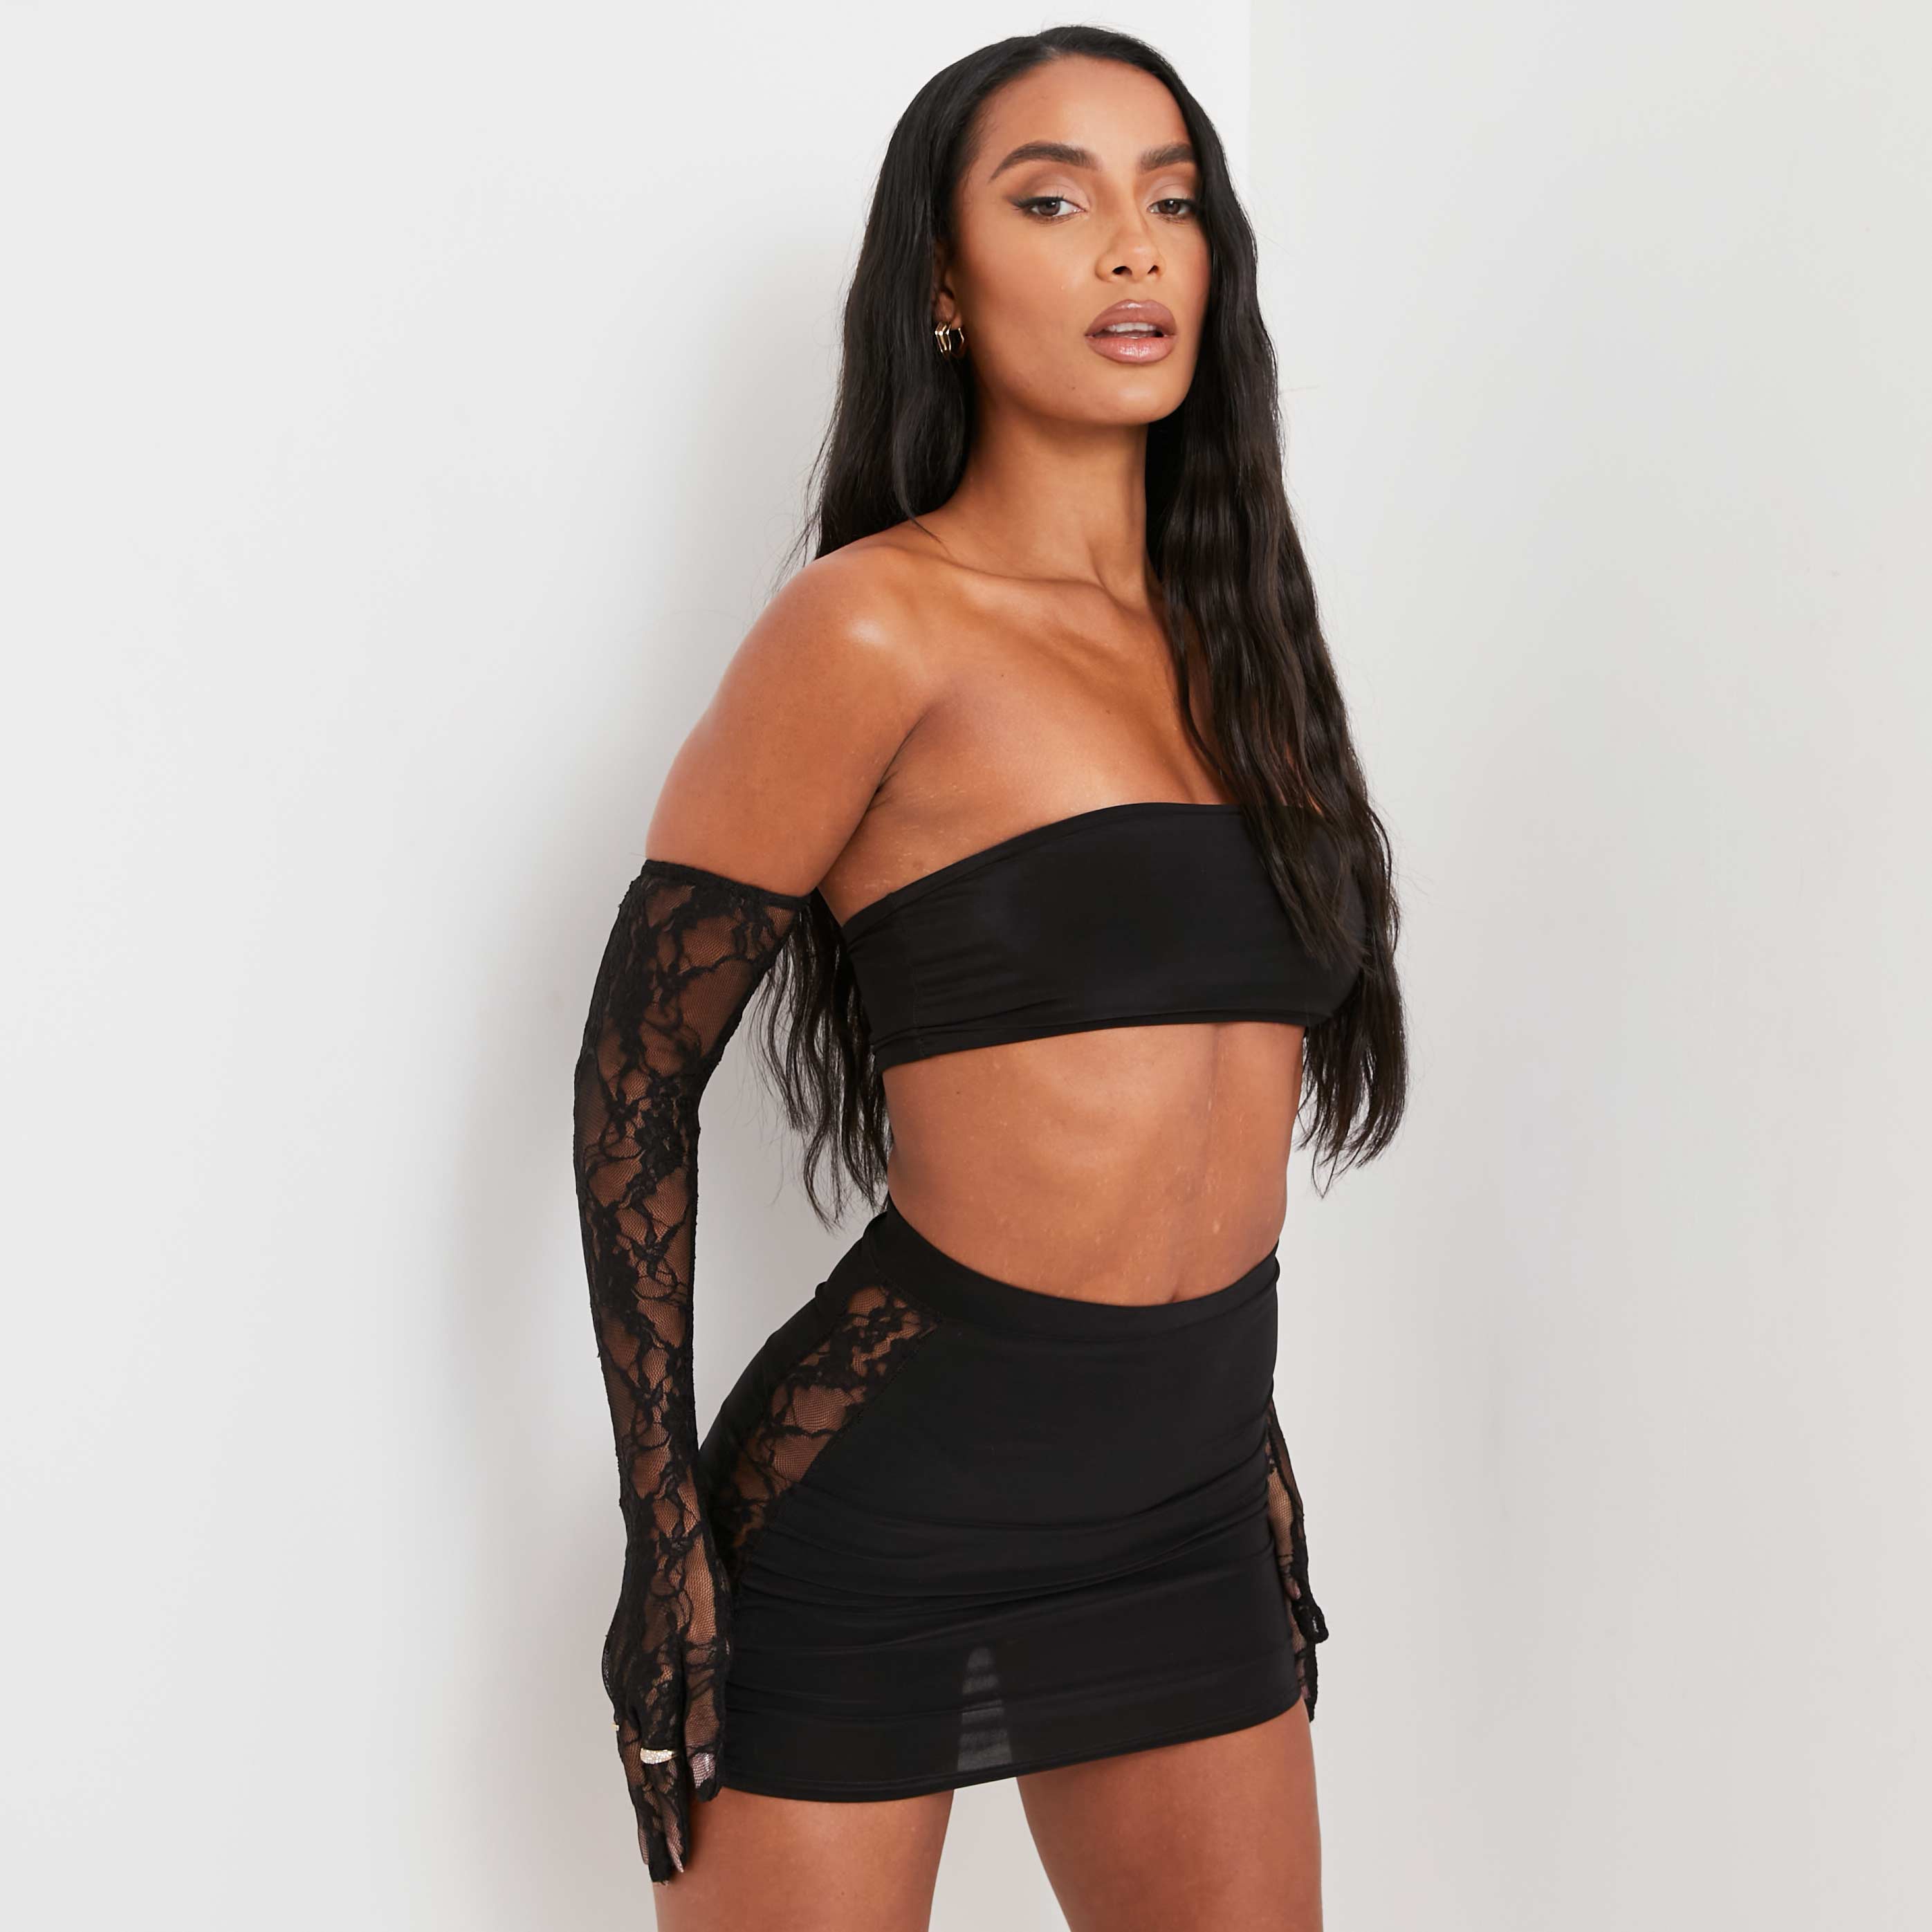 Bandeau Crop Top And Lace Gloves In Black UK 10, Black